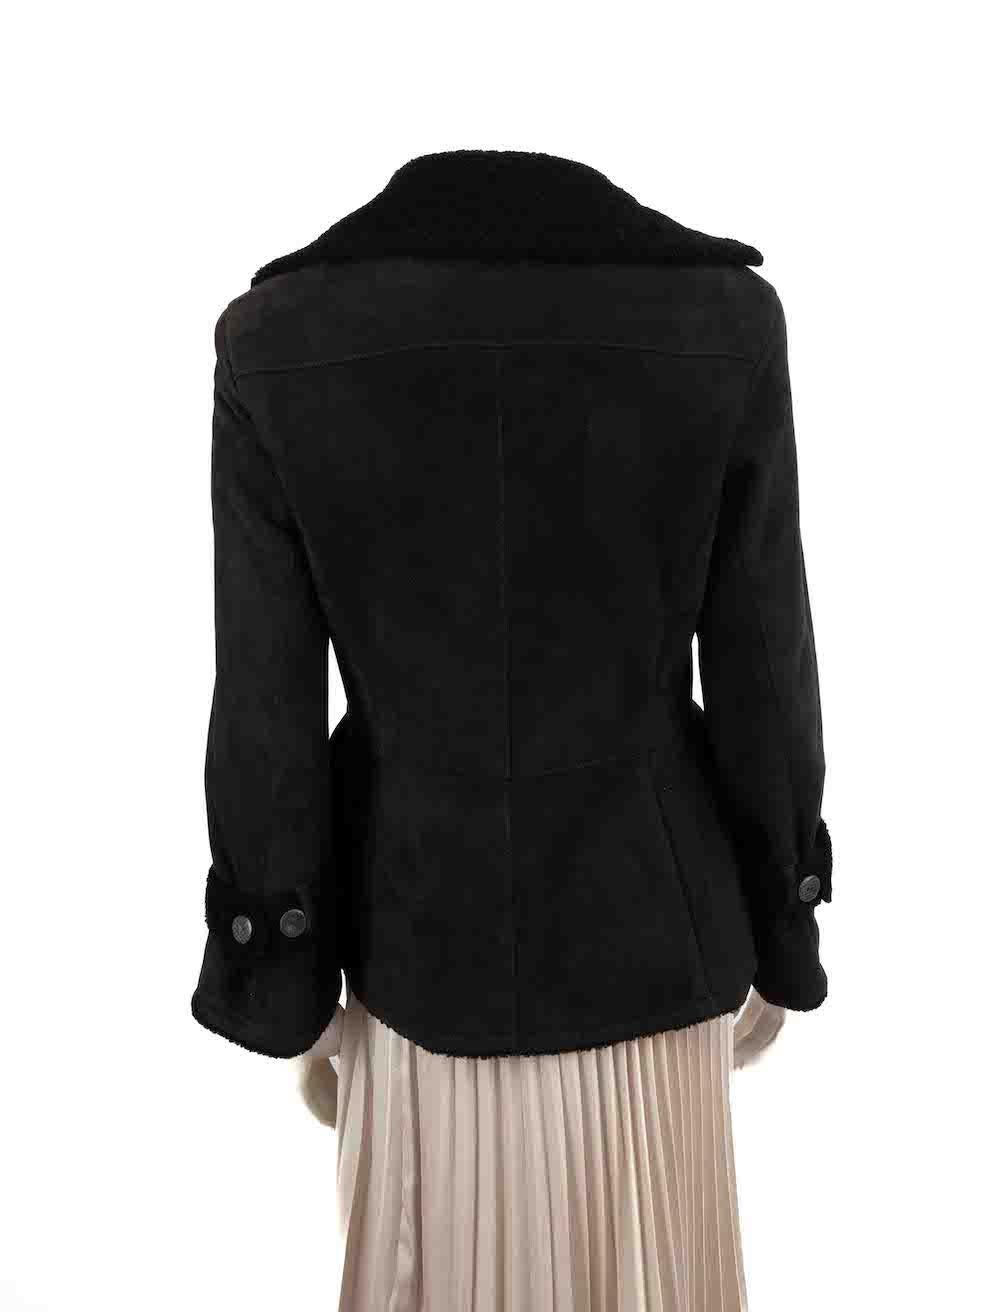 Malo Black Suede Leather Mid Length Coat Size L In Excellent Condition For Sale In London, GB